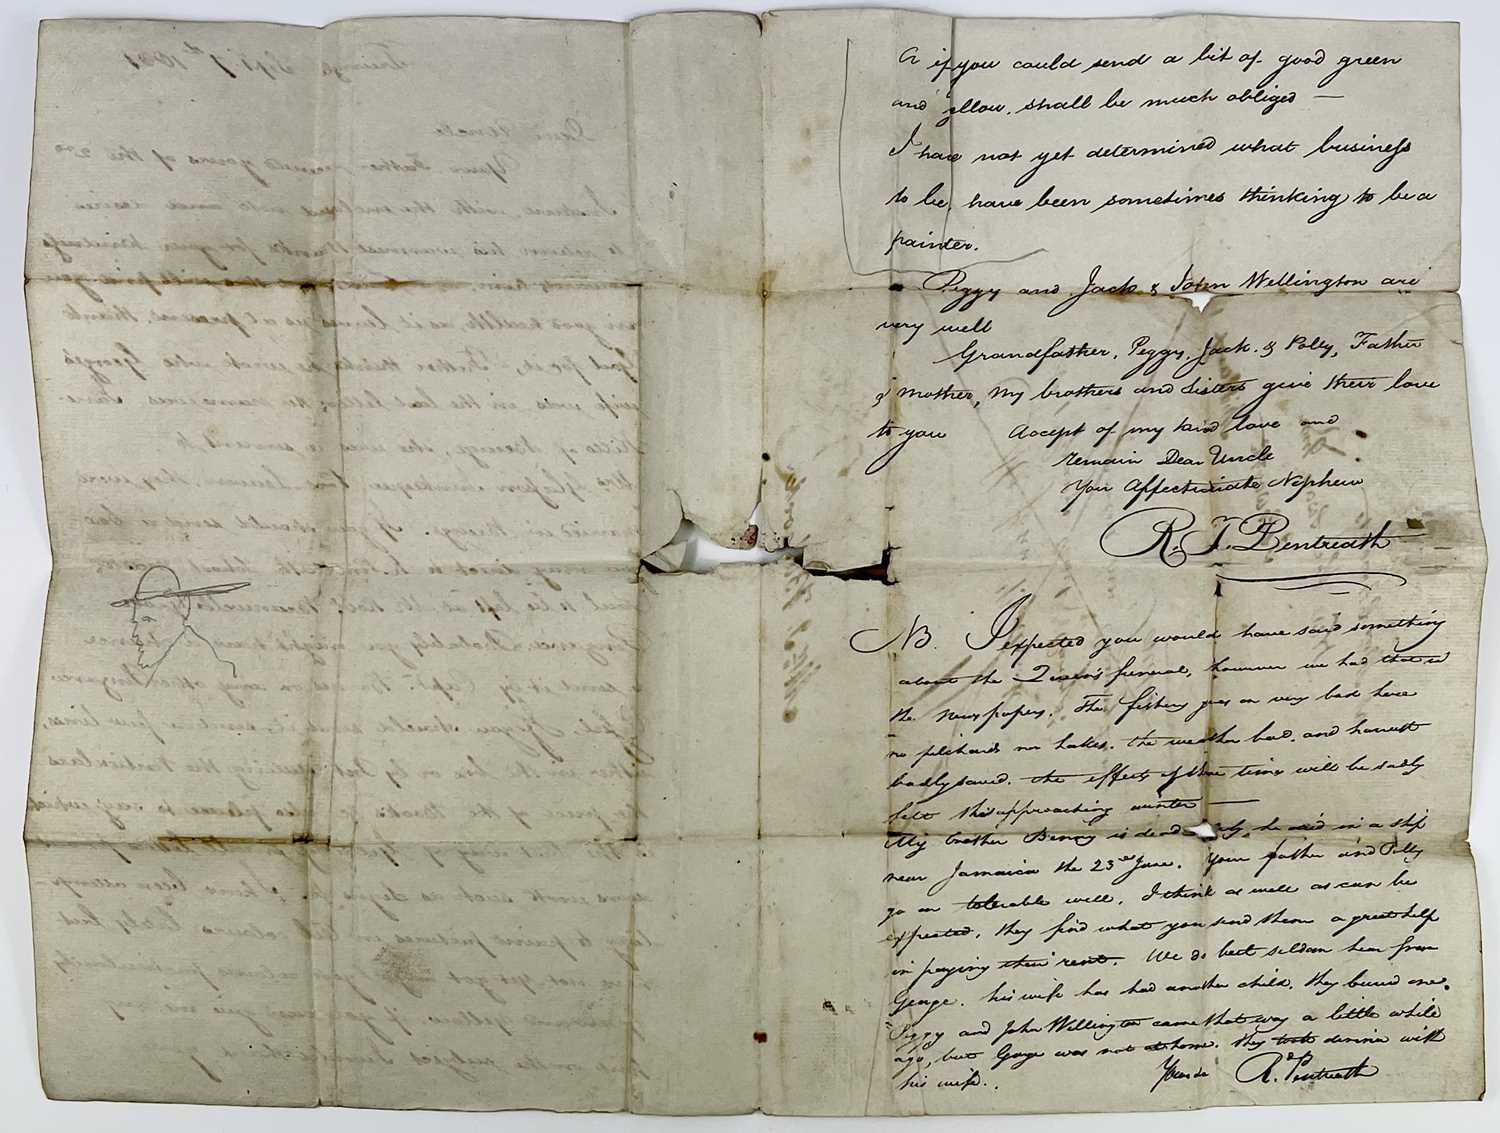 R. T. PENTREATH (artist). Handwritten letter from Pentreath to his uncle, in regards to shipping oil - Image 4 of 6